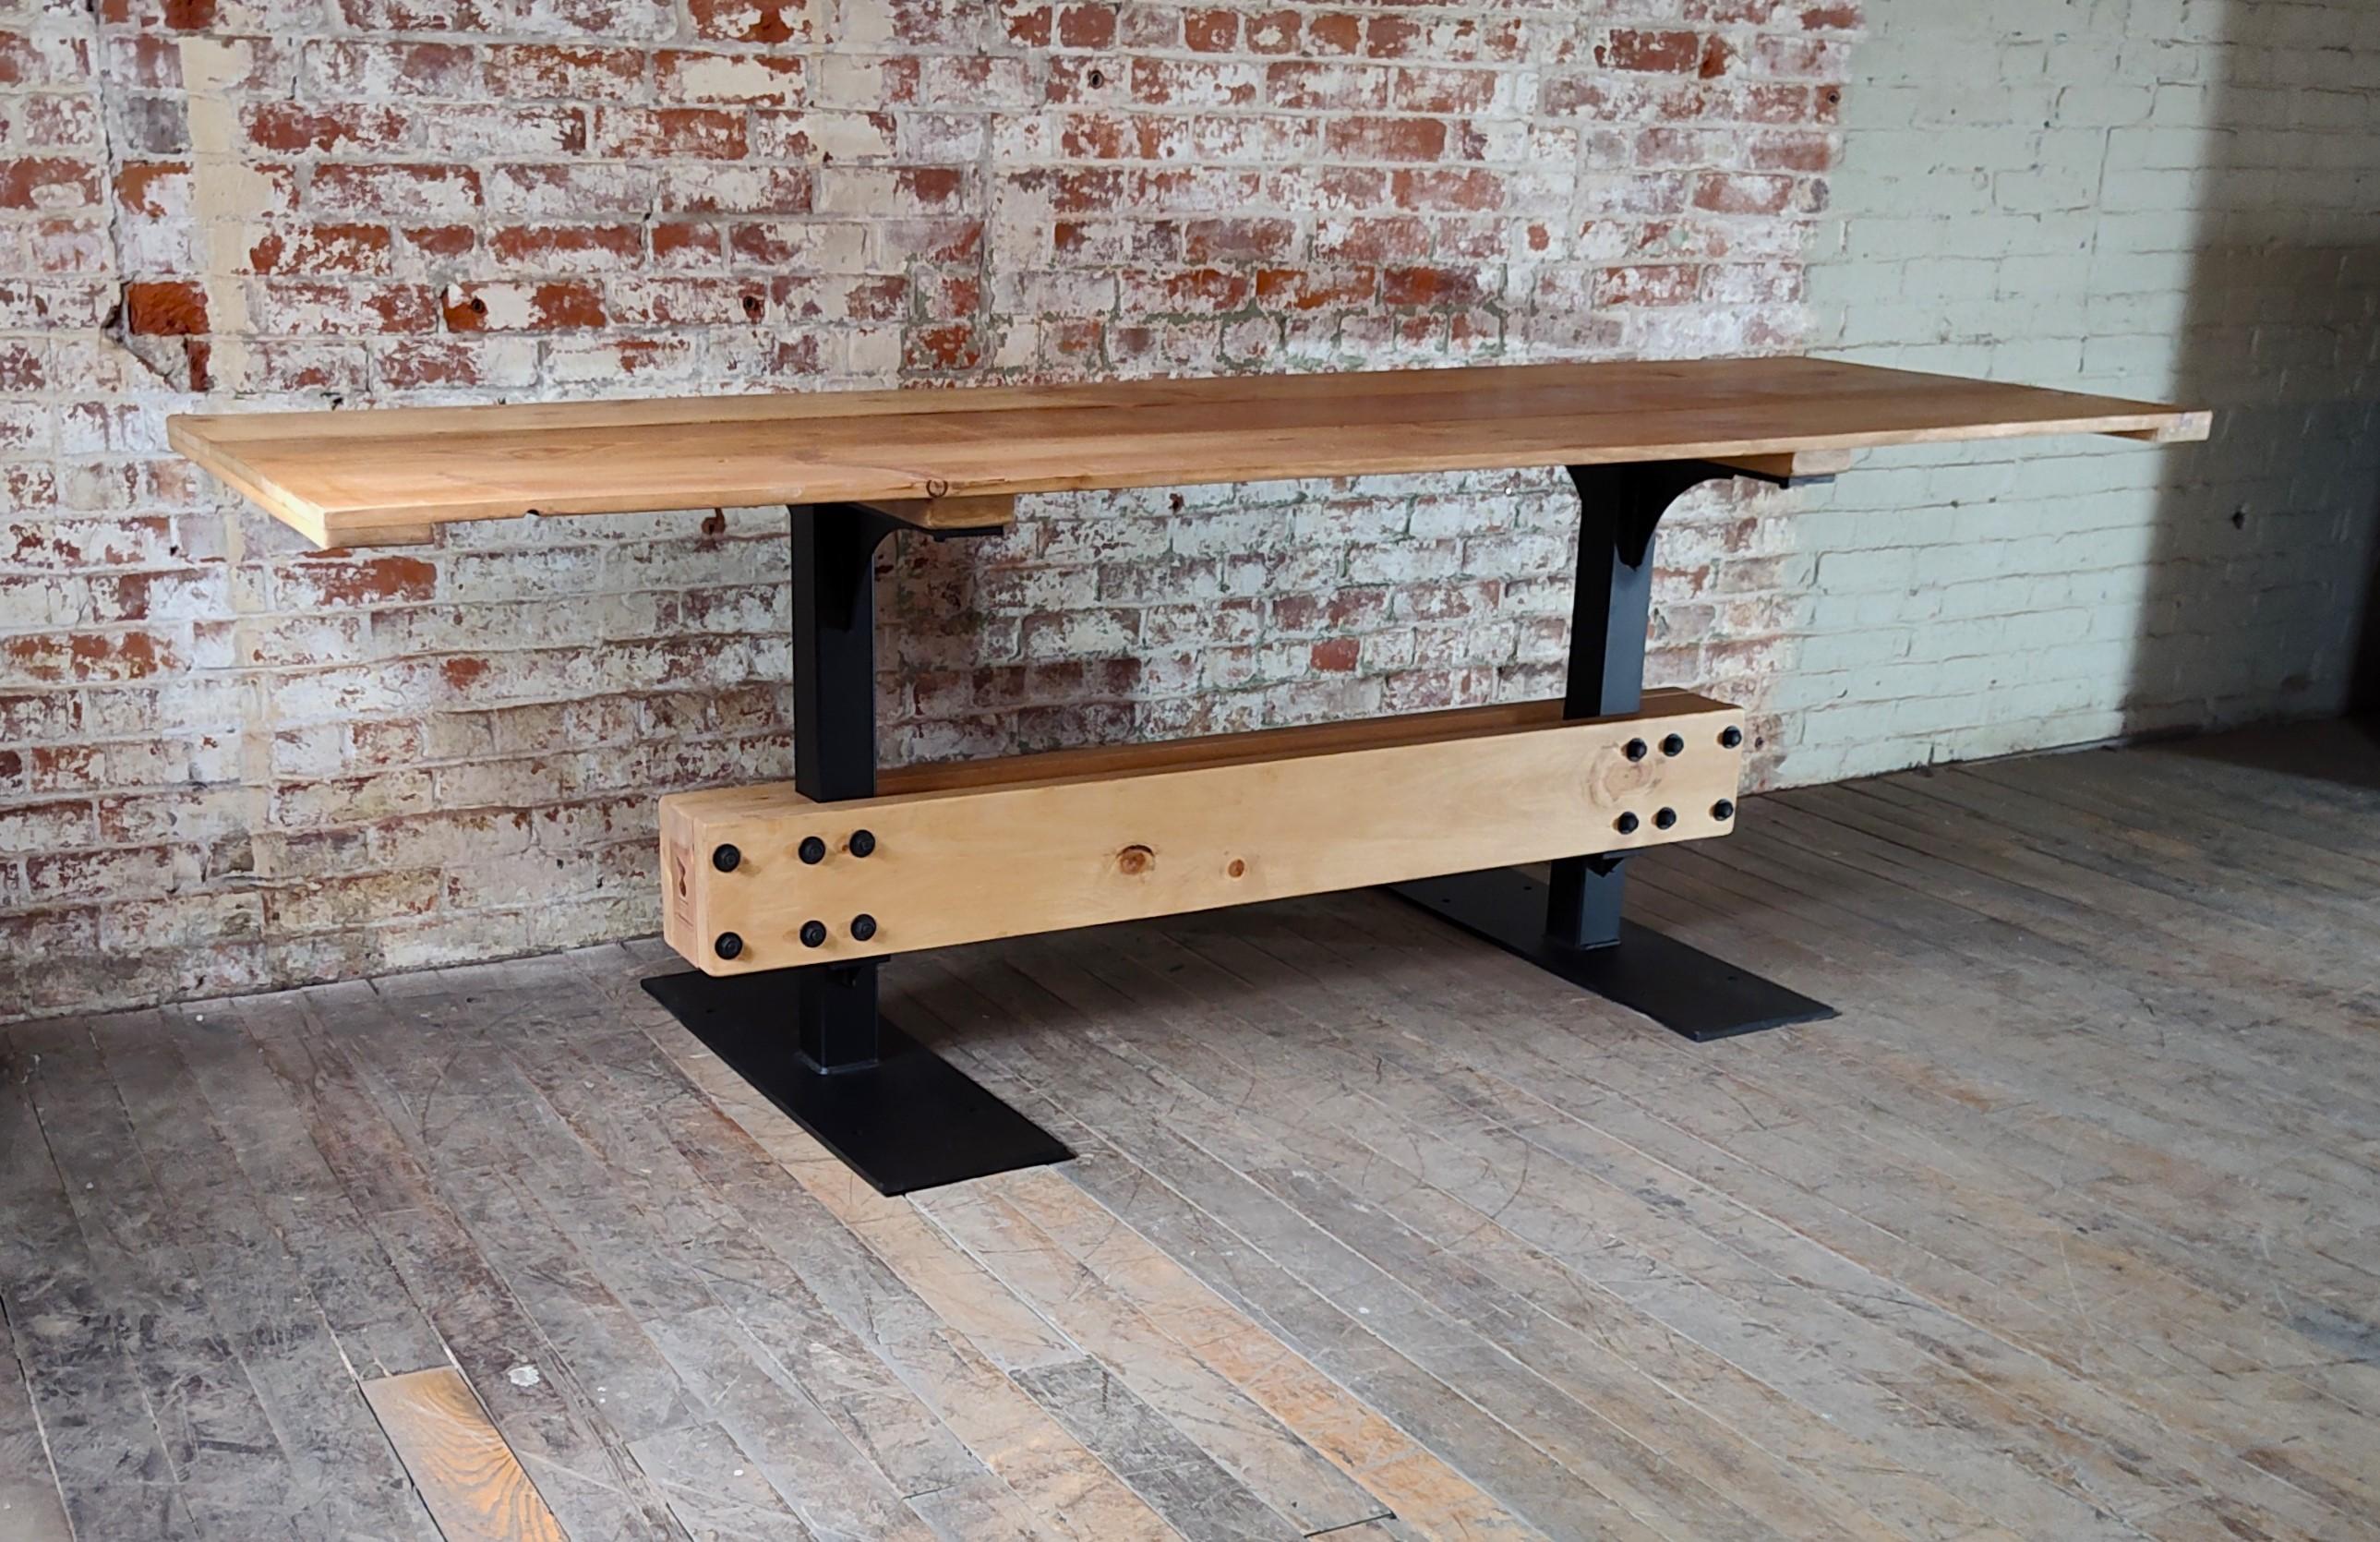 Reclaimed Pine & Steel Double Pedestal Dining / Buffet Table

*Made to order and the size is customizable*

Overall Dimensions: 30